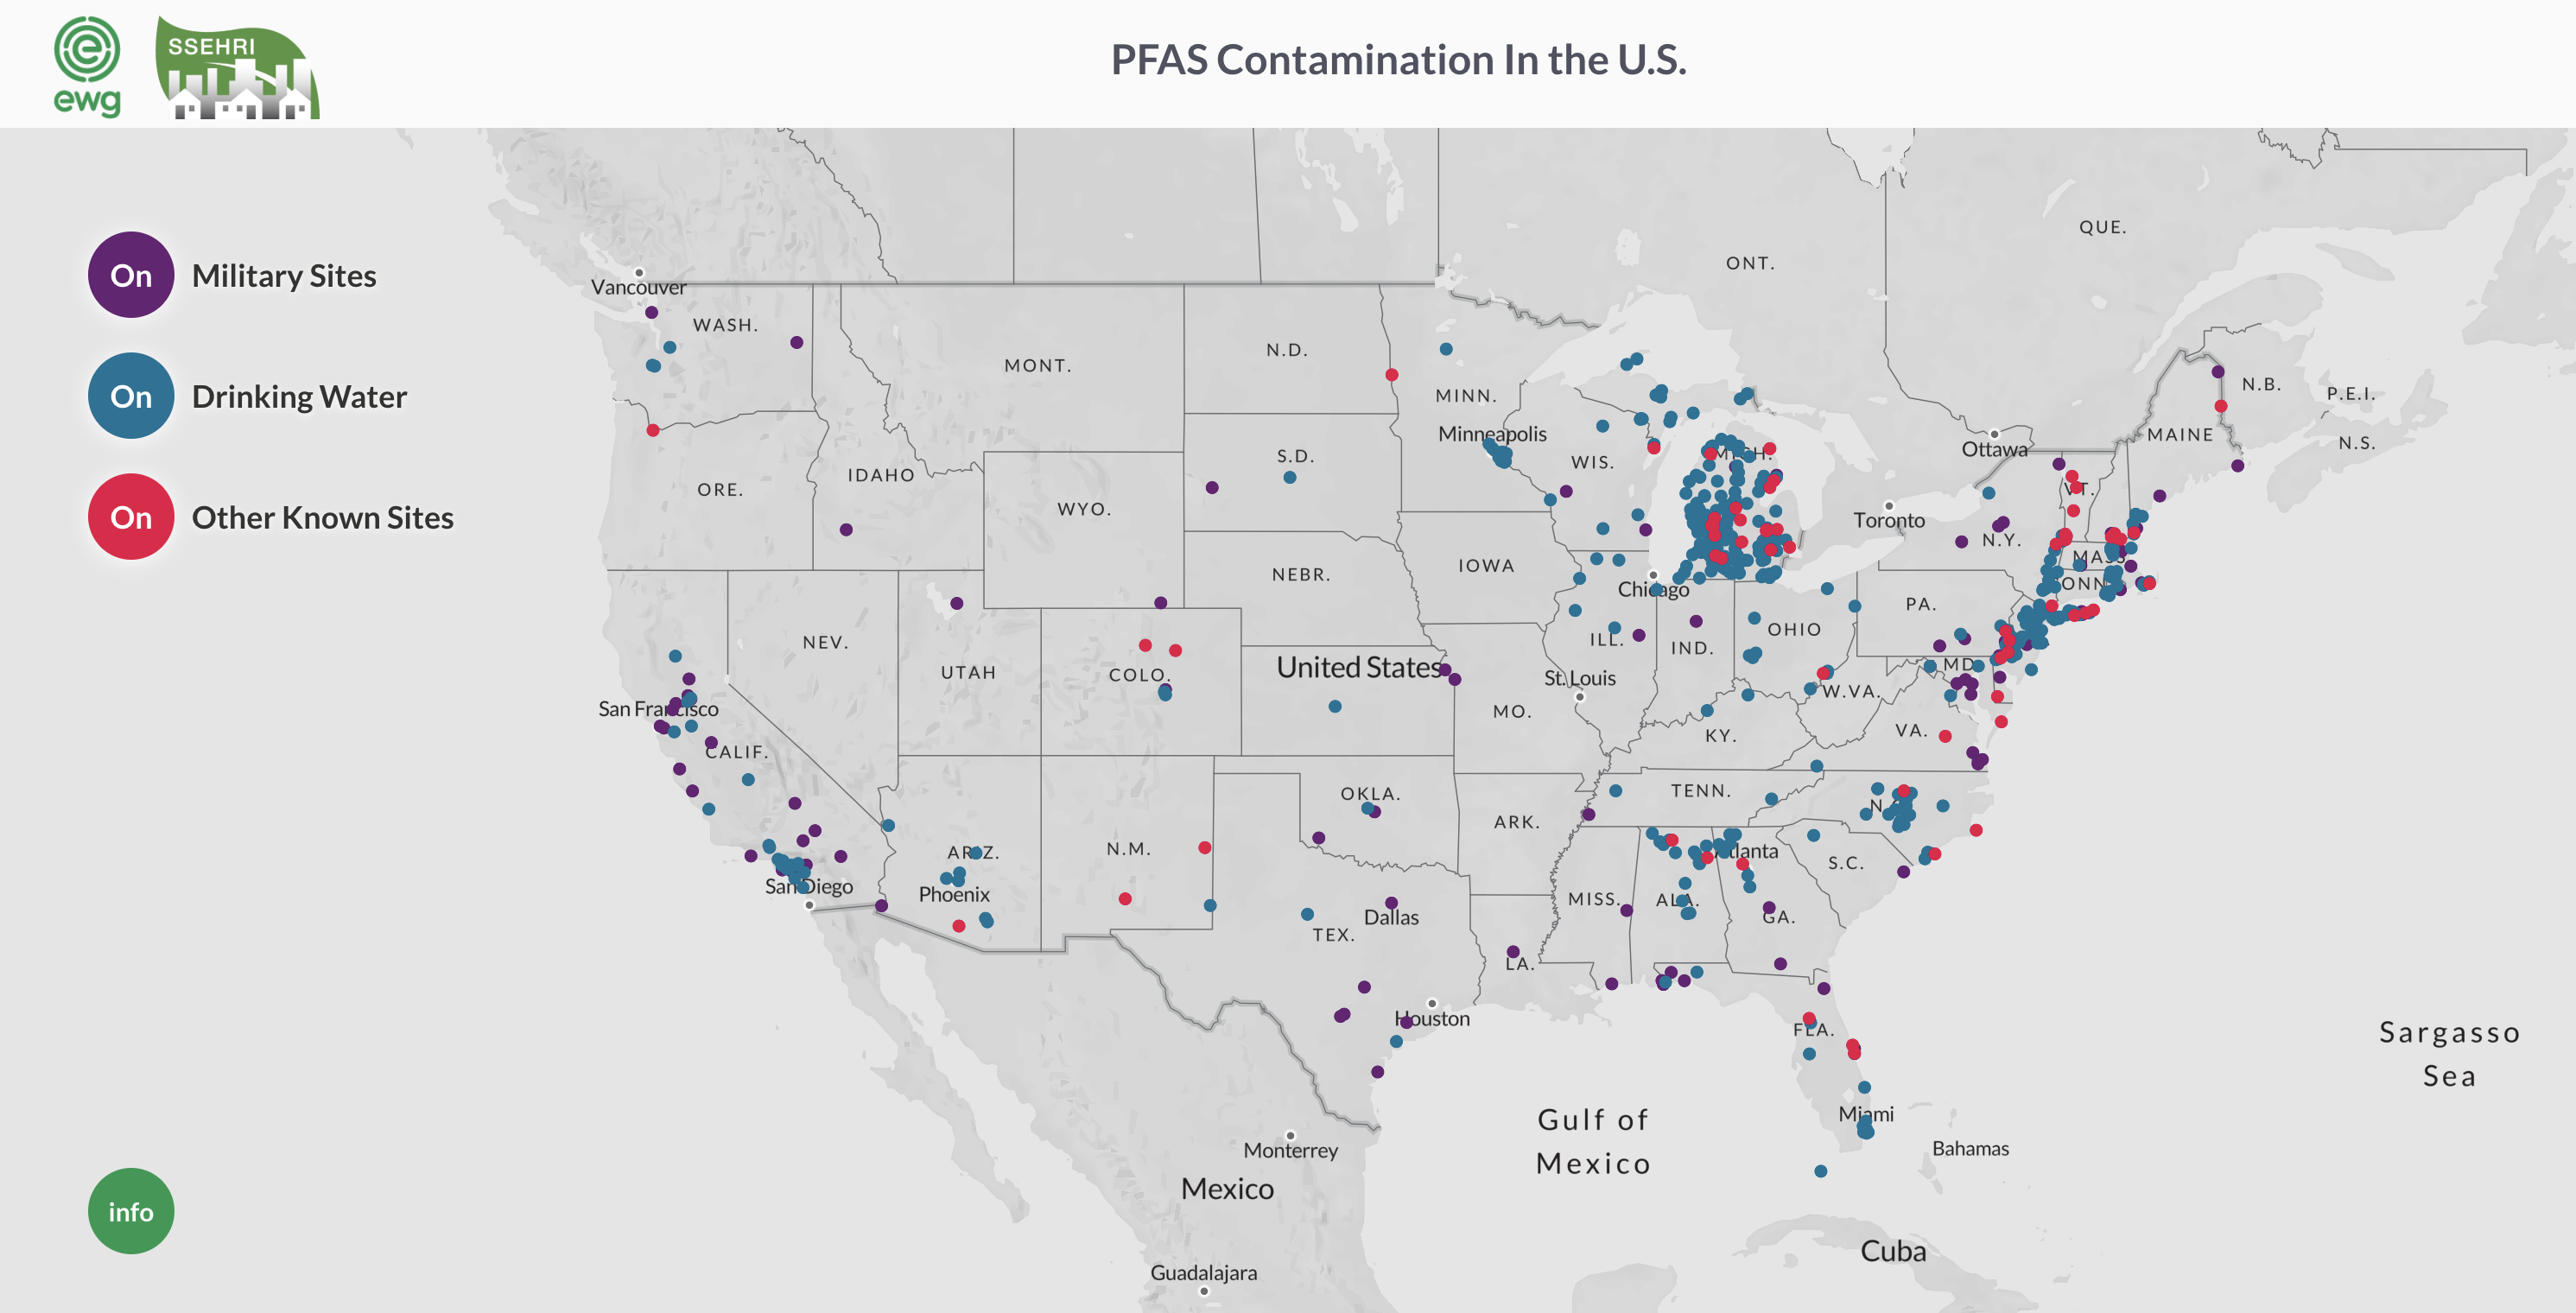 Harmful Water Contamination Present in Nearly All U.S. States